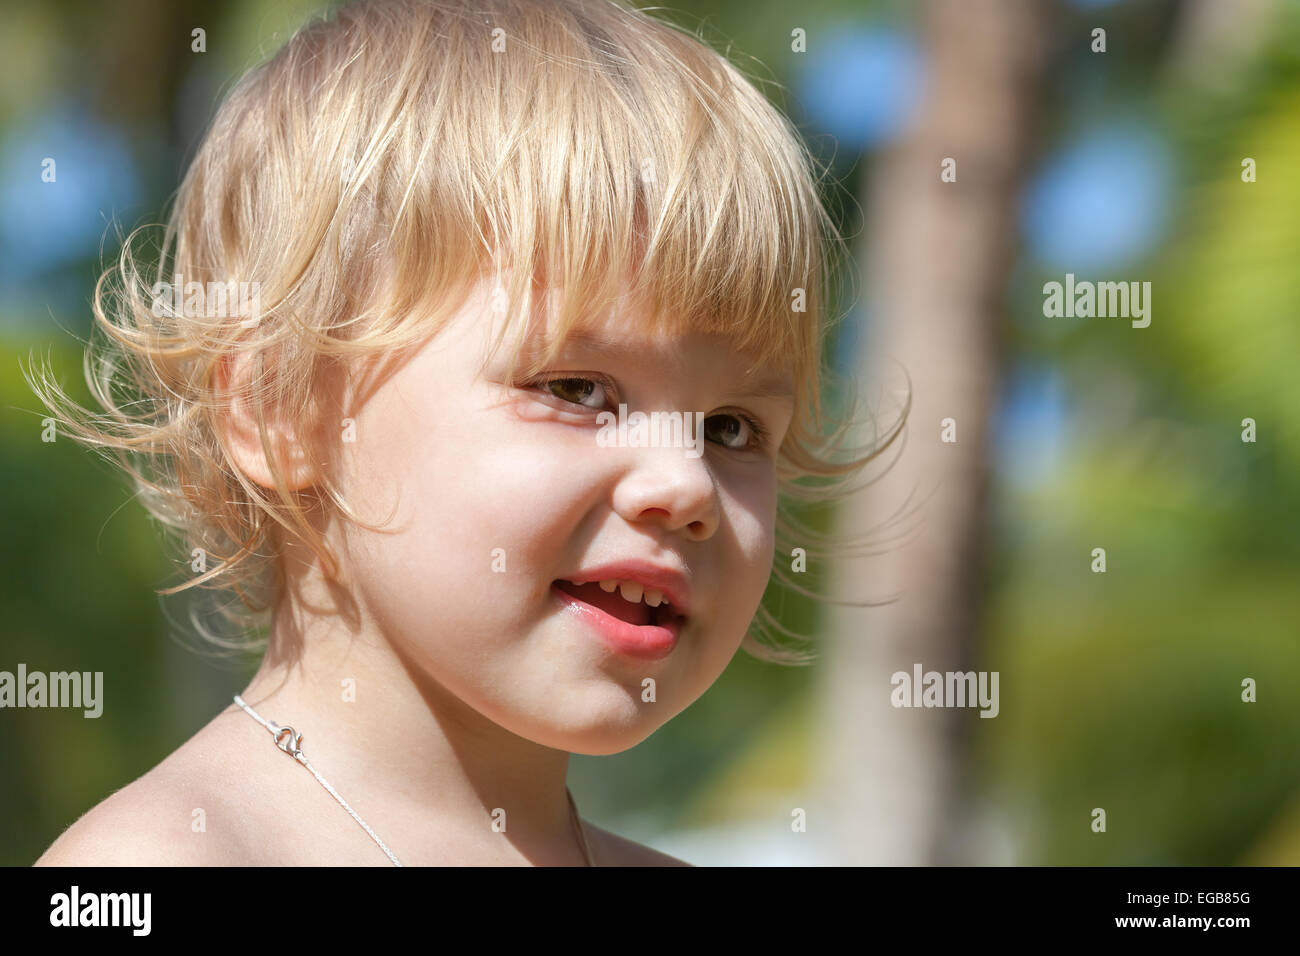 Outdoor closeup portrait of cute smiling Caucasian blond baby girl Stock Photo